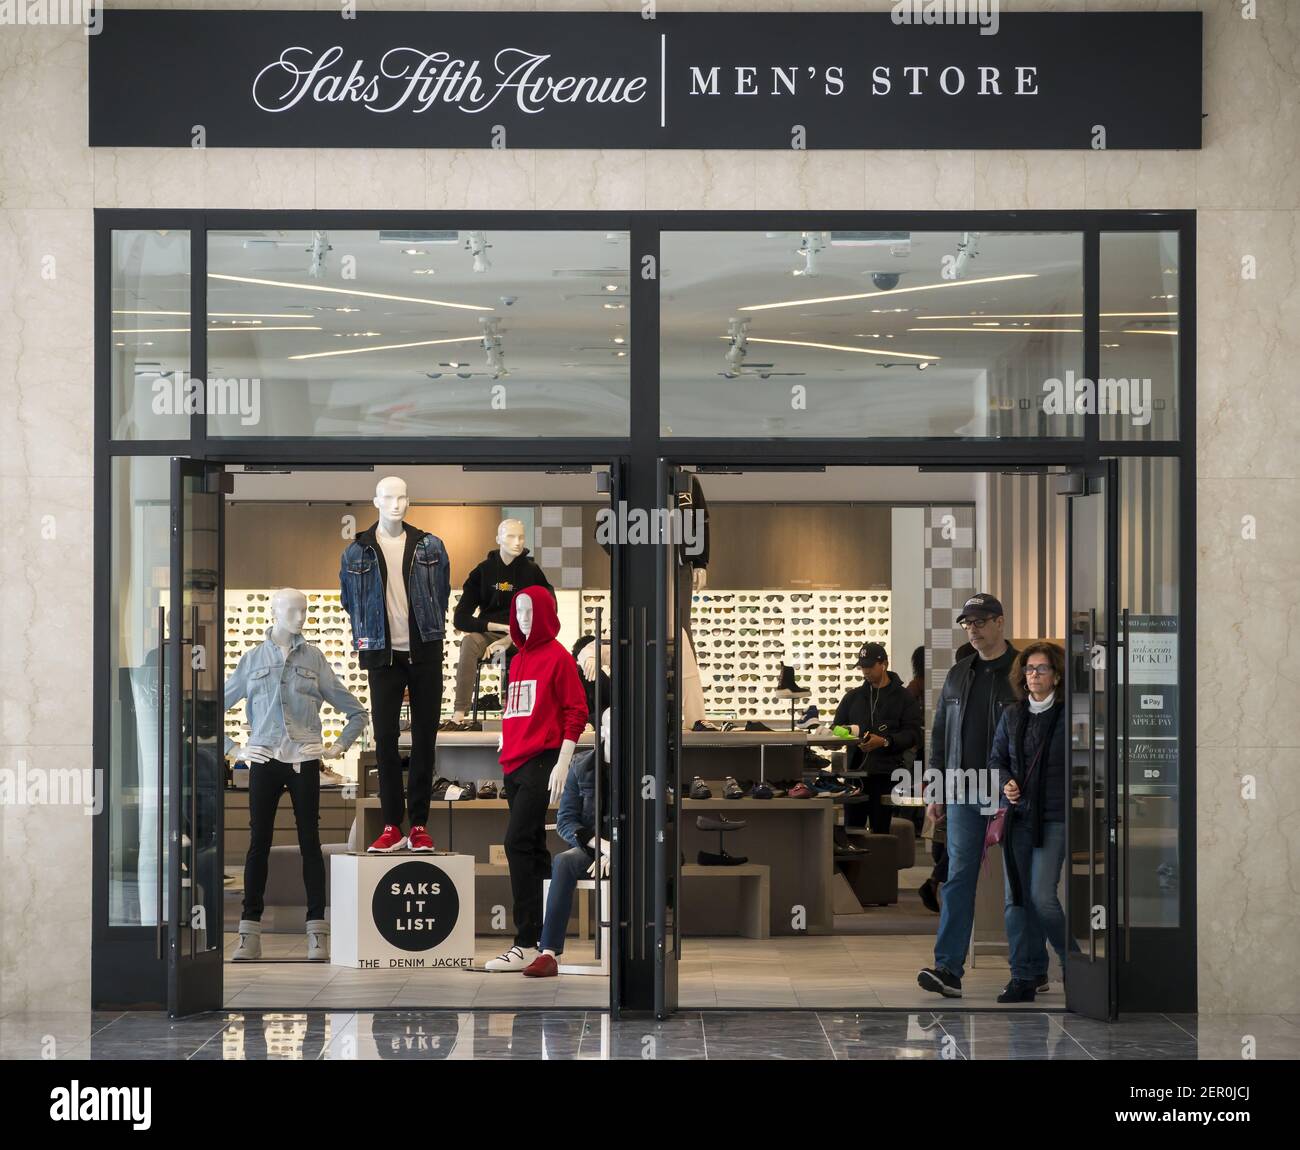 Saks Fifth Avenue owner Hudson's Bay is going private